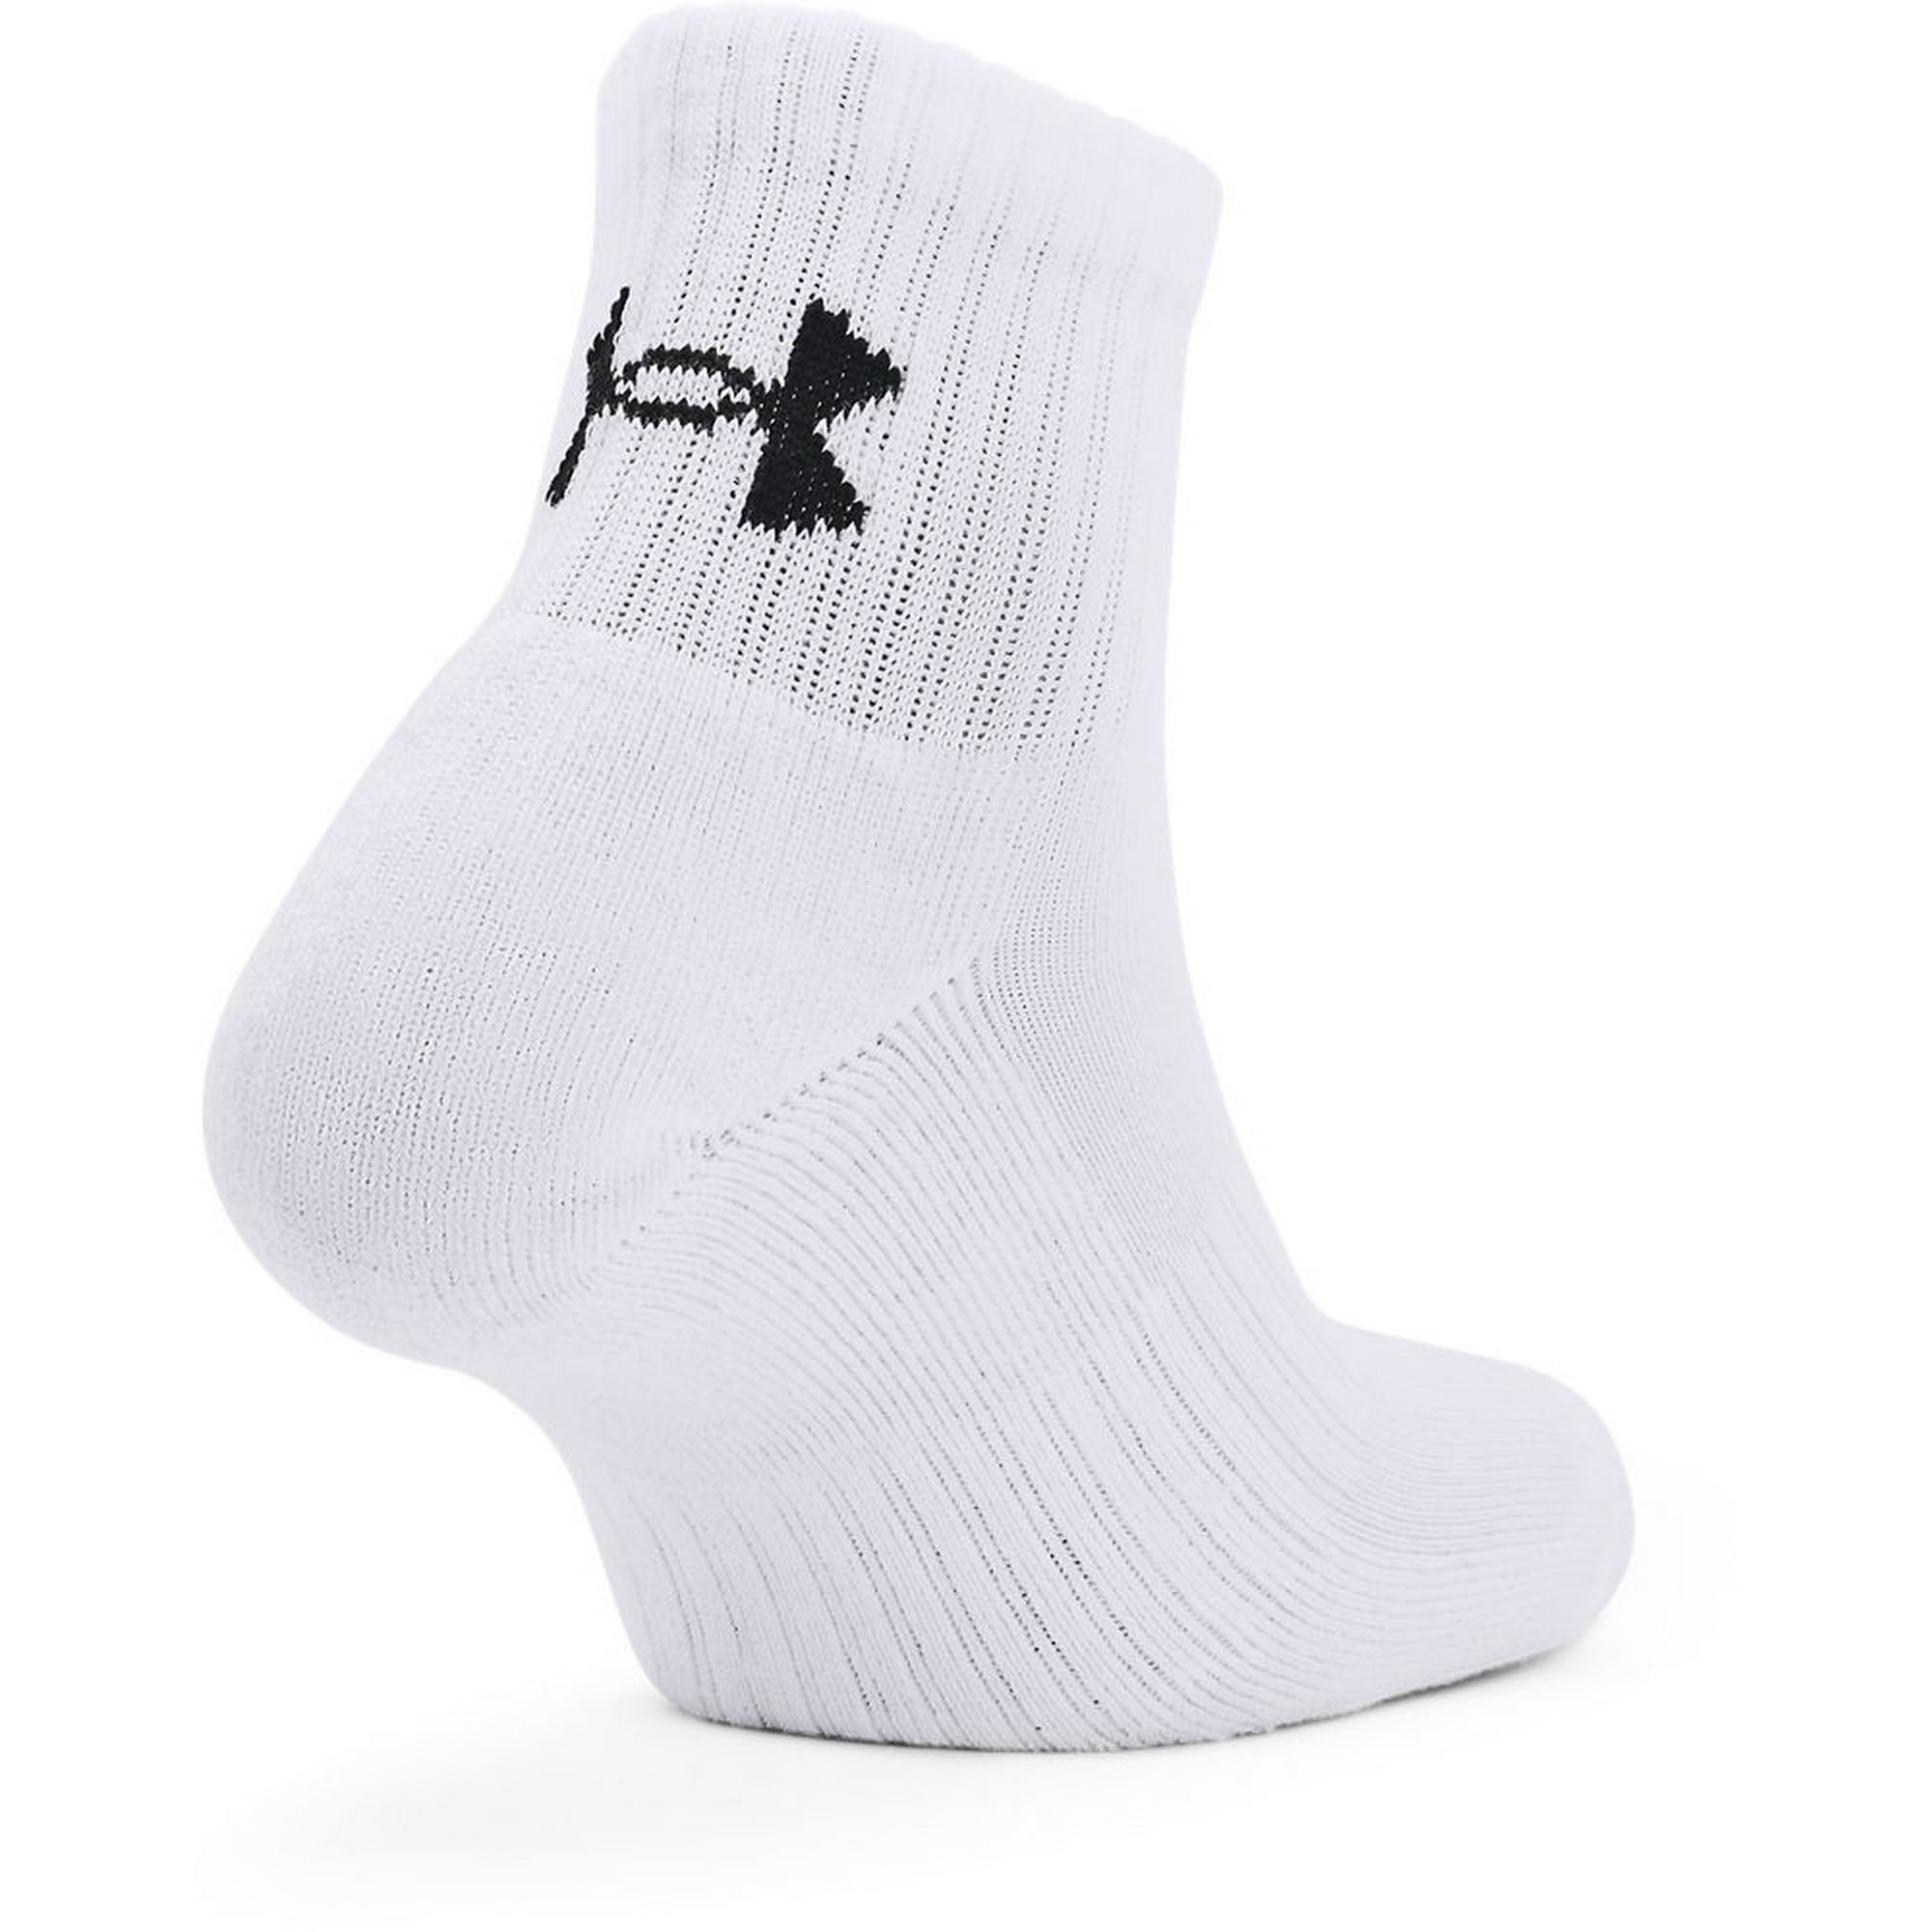 CALCETINES UNDER ARMOUR SOCCER COLOR BLANCO